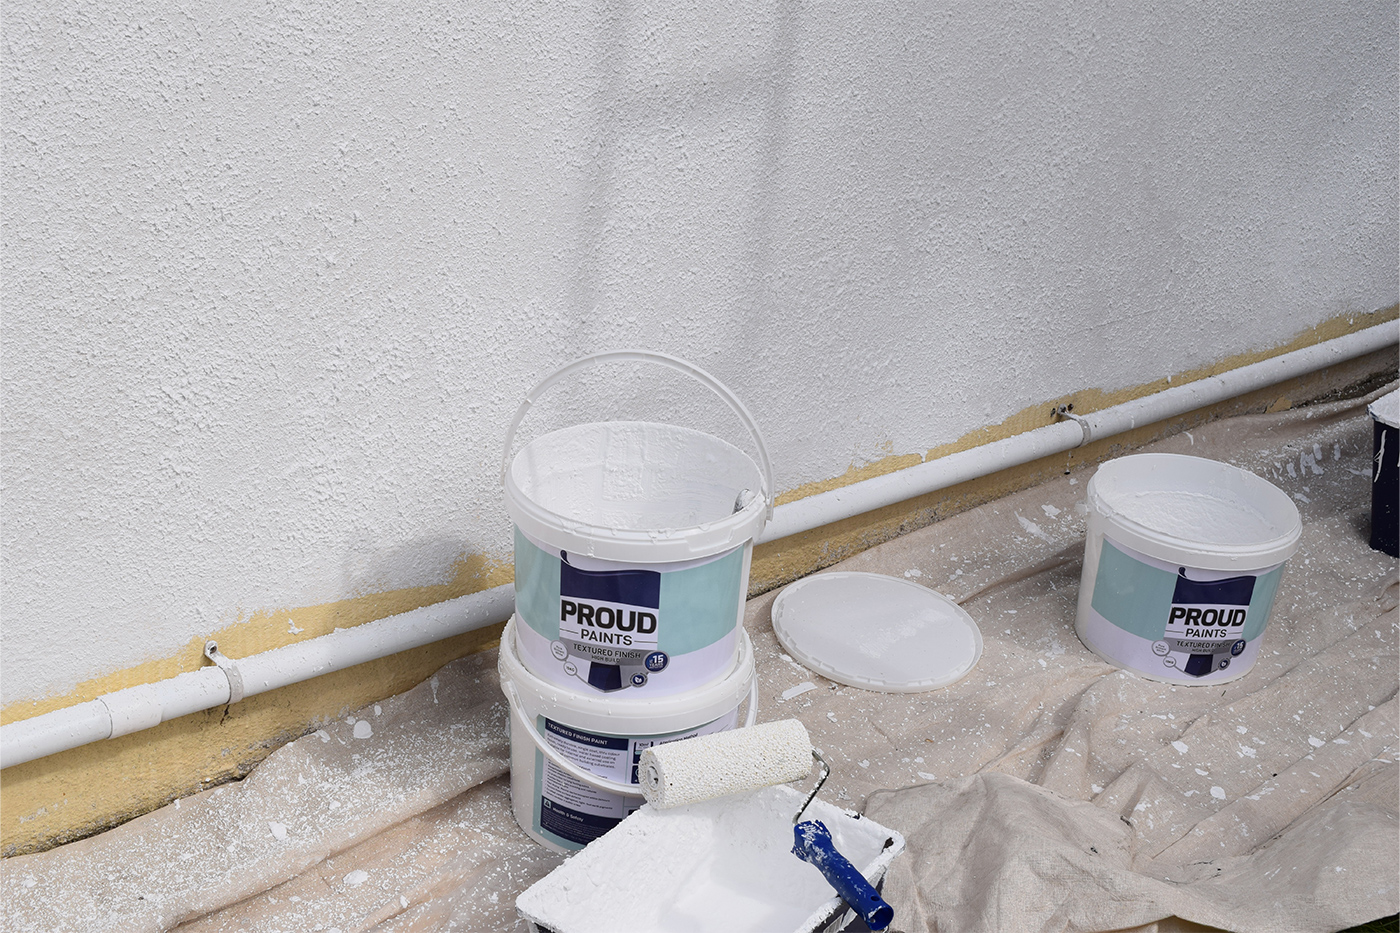 Proud Paints expert help and advice how to apply textured high build paint advice and steps to painting your homes interior and exterior choosing paint colours from Proud Paints confident colour collection will bring your homes masonry walls to life